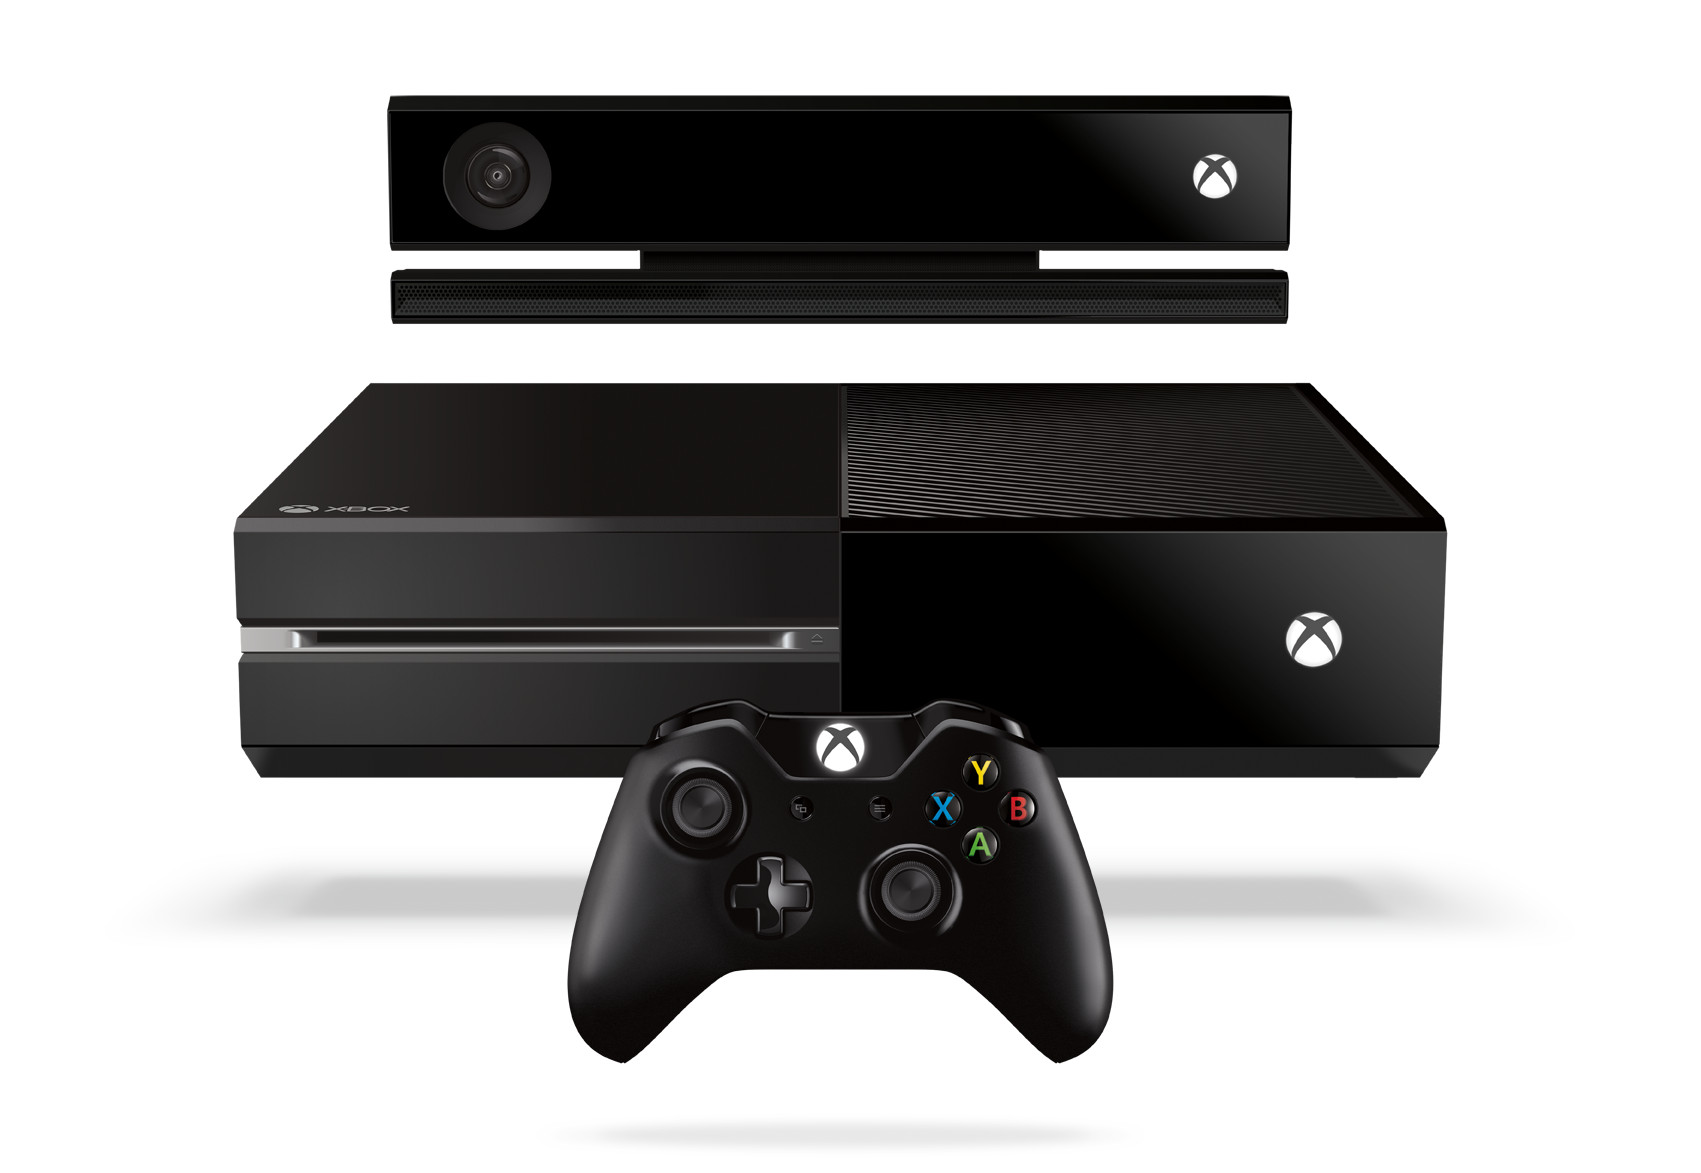 Xbox One: Pre-Owned, Not Always Online – The Average Gamer
